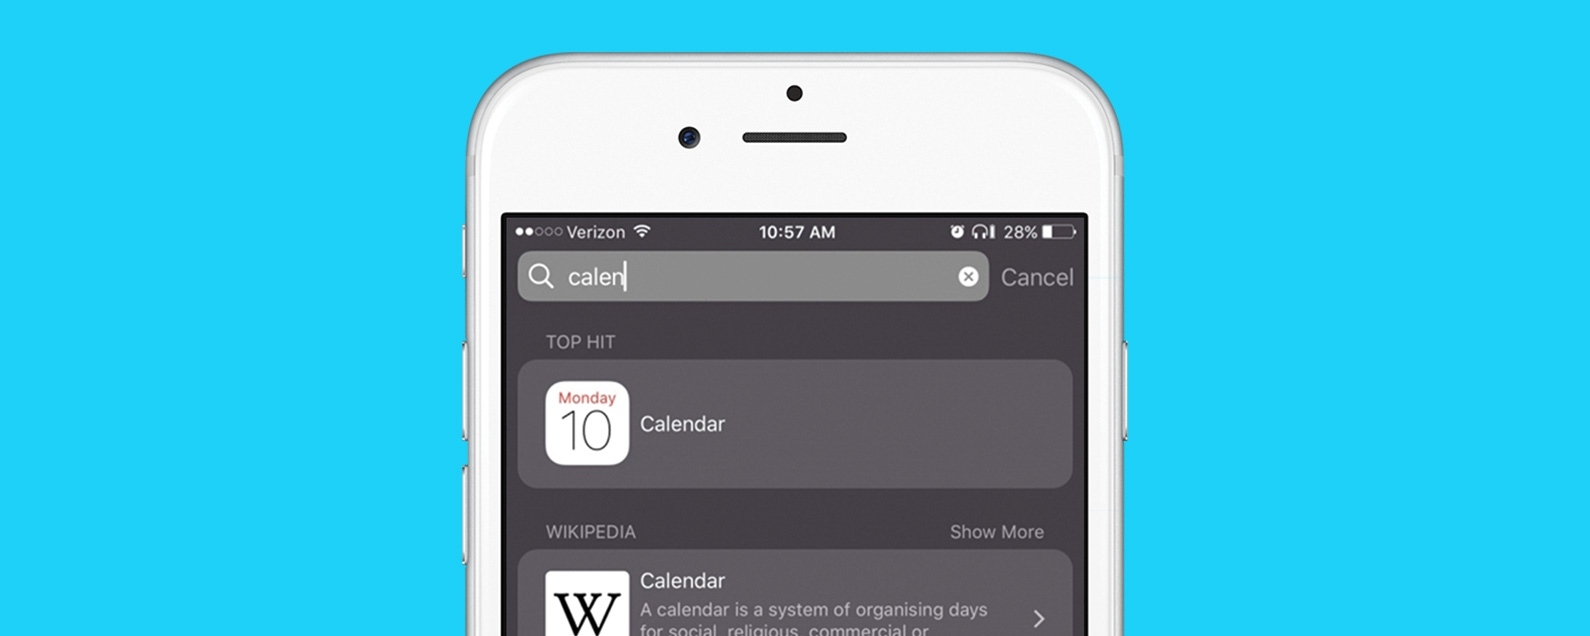 Iphone Calendar Disappeared? How To Get It Back On Your Iphone Restore Calendar Icon On Iphone